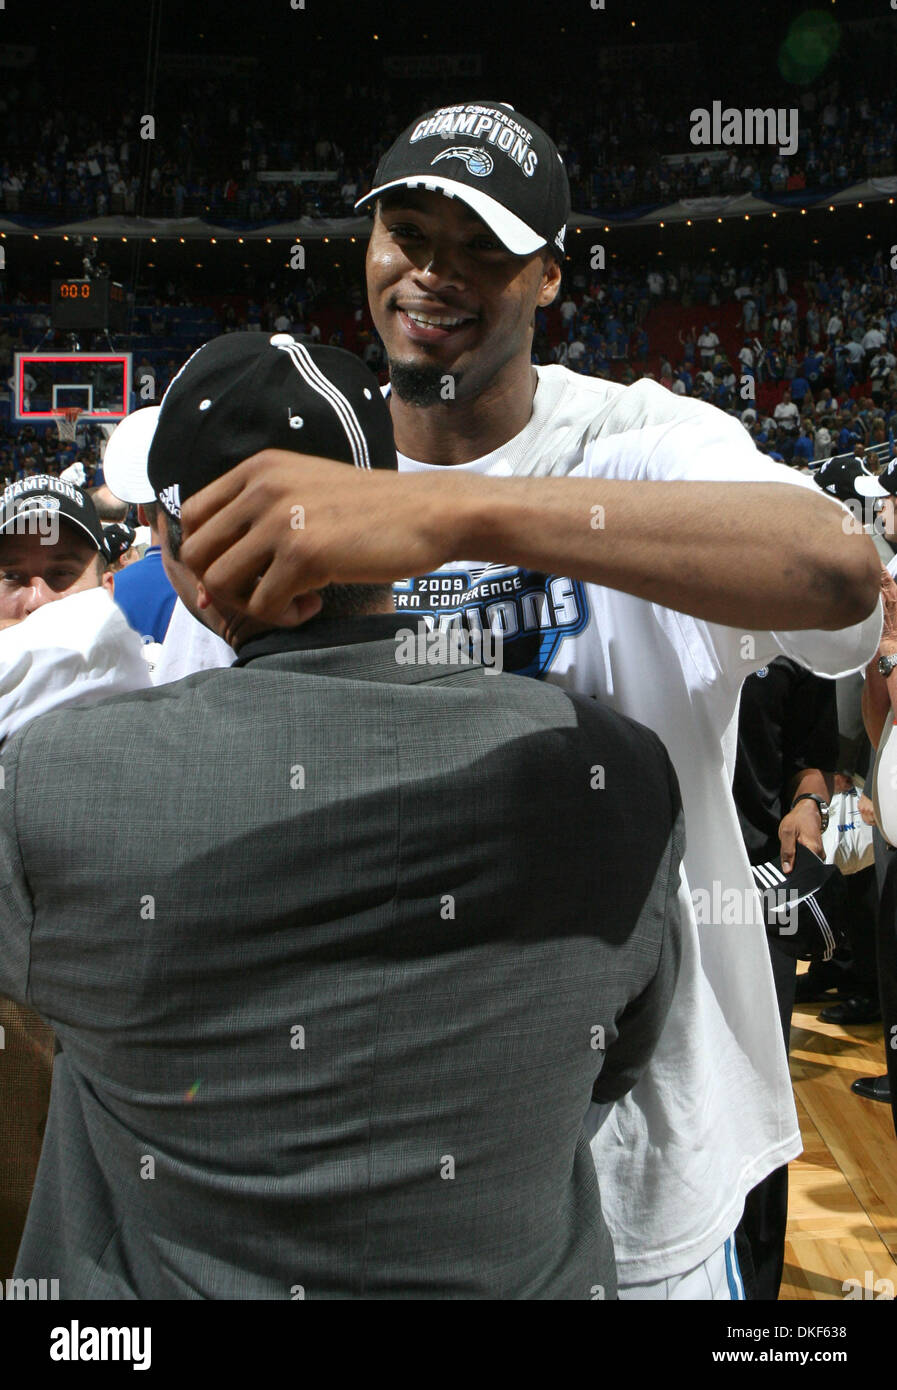 May 30, 2009 - Orlando, Florida, USA - Orlando Magic forward RASHARD LEWIS celebrates after beating the Cleveland Cavaliers in game six of the Eastern Conference Finals at Amway Arena in Orlando, FL Saturday, May 30, 2009. (Credit Image: © Gary W. Green/Orlando Sentinel/ZUMA Press) RESTRICTIONS: * Daytona and Online RIGHTS OUT * Stock Photo